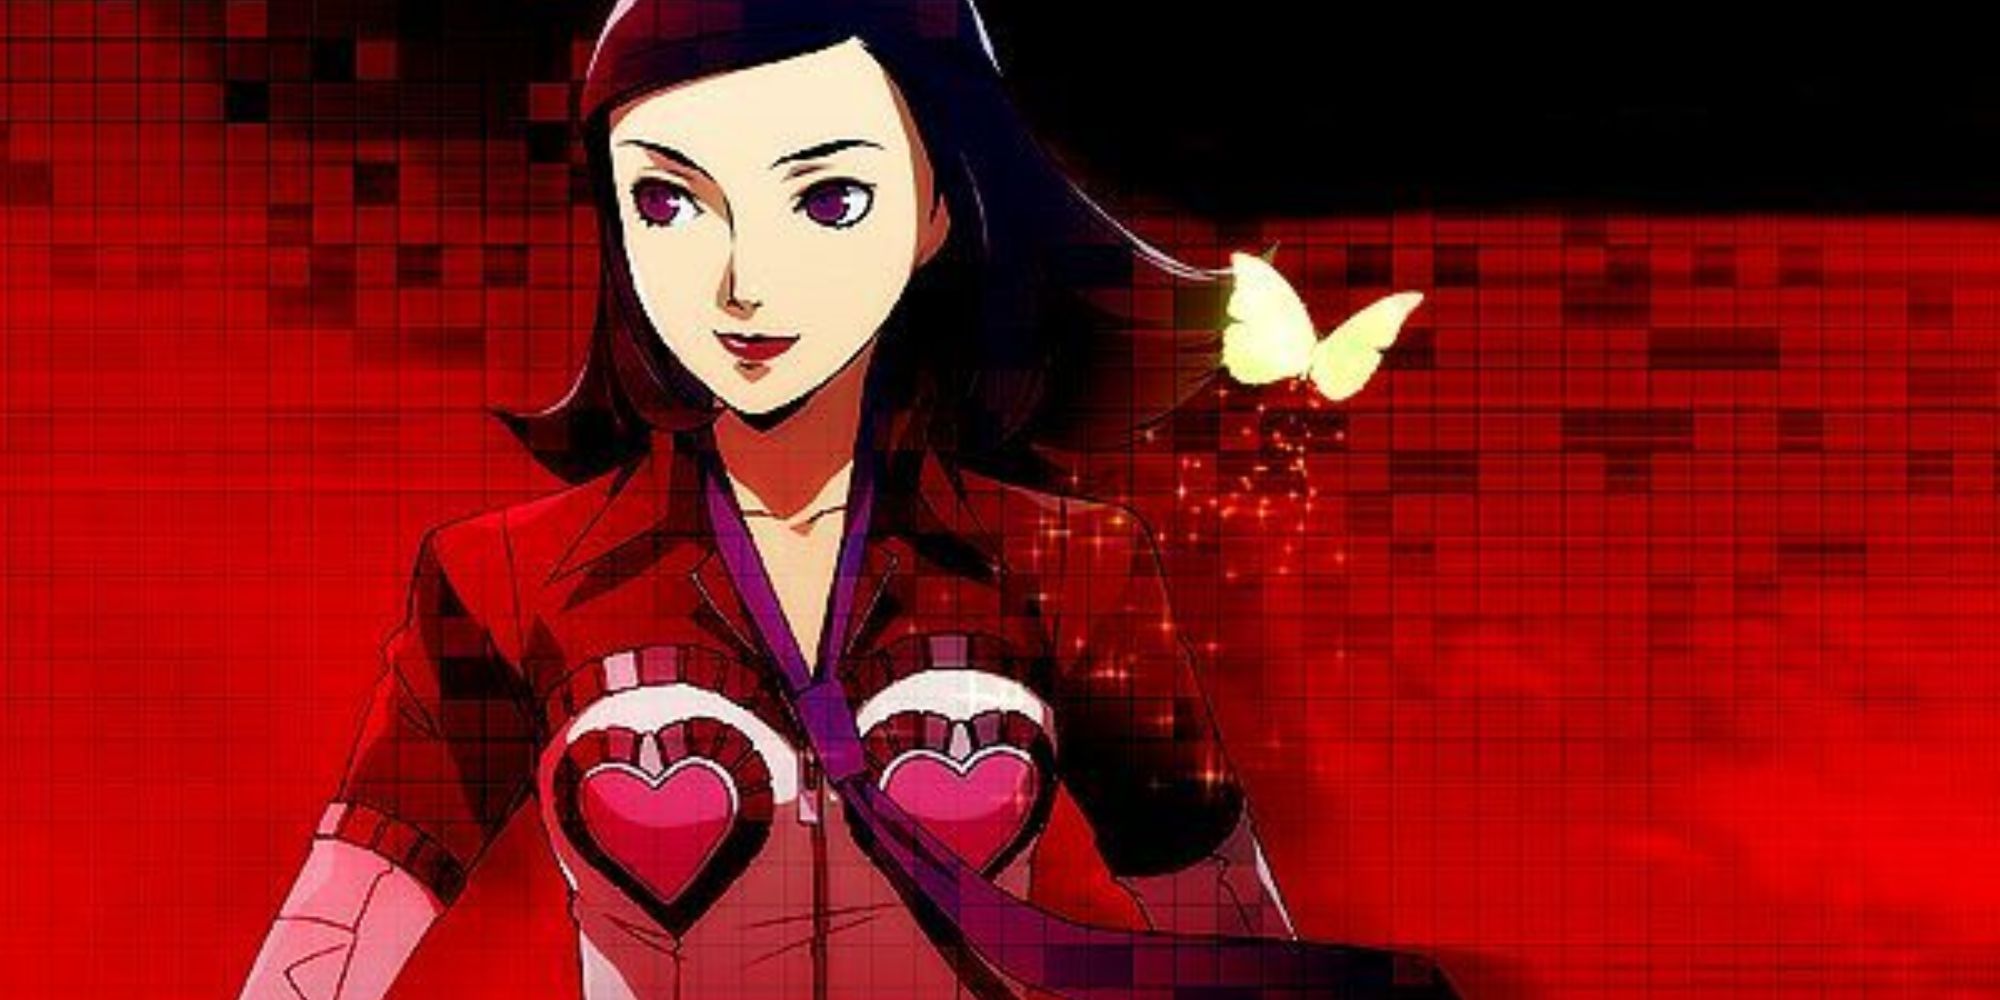 Persona 2 Japanese DLC Receives English Fan Translation After 12 Years